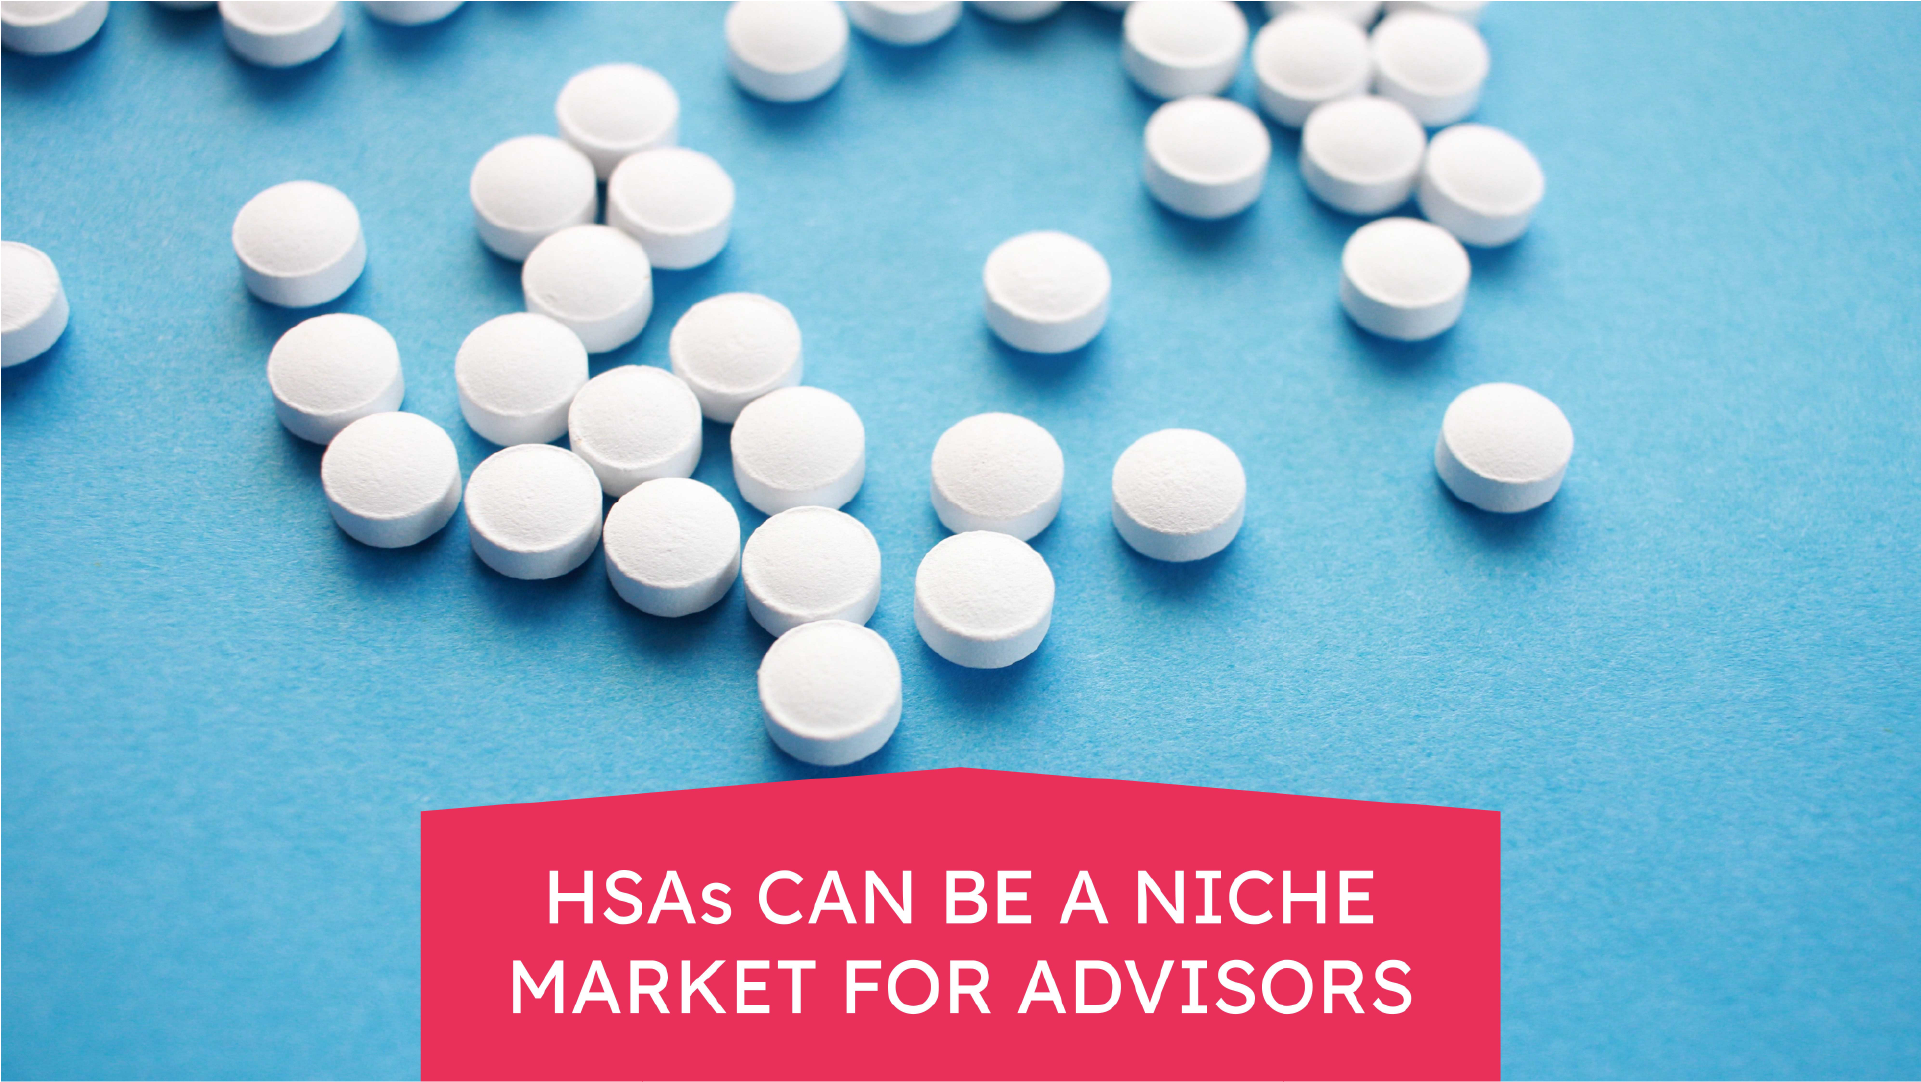 HSAs Can Be a Niche Market for Advisors